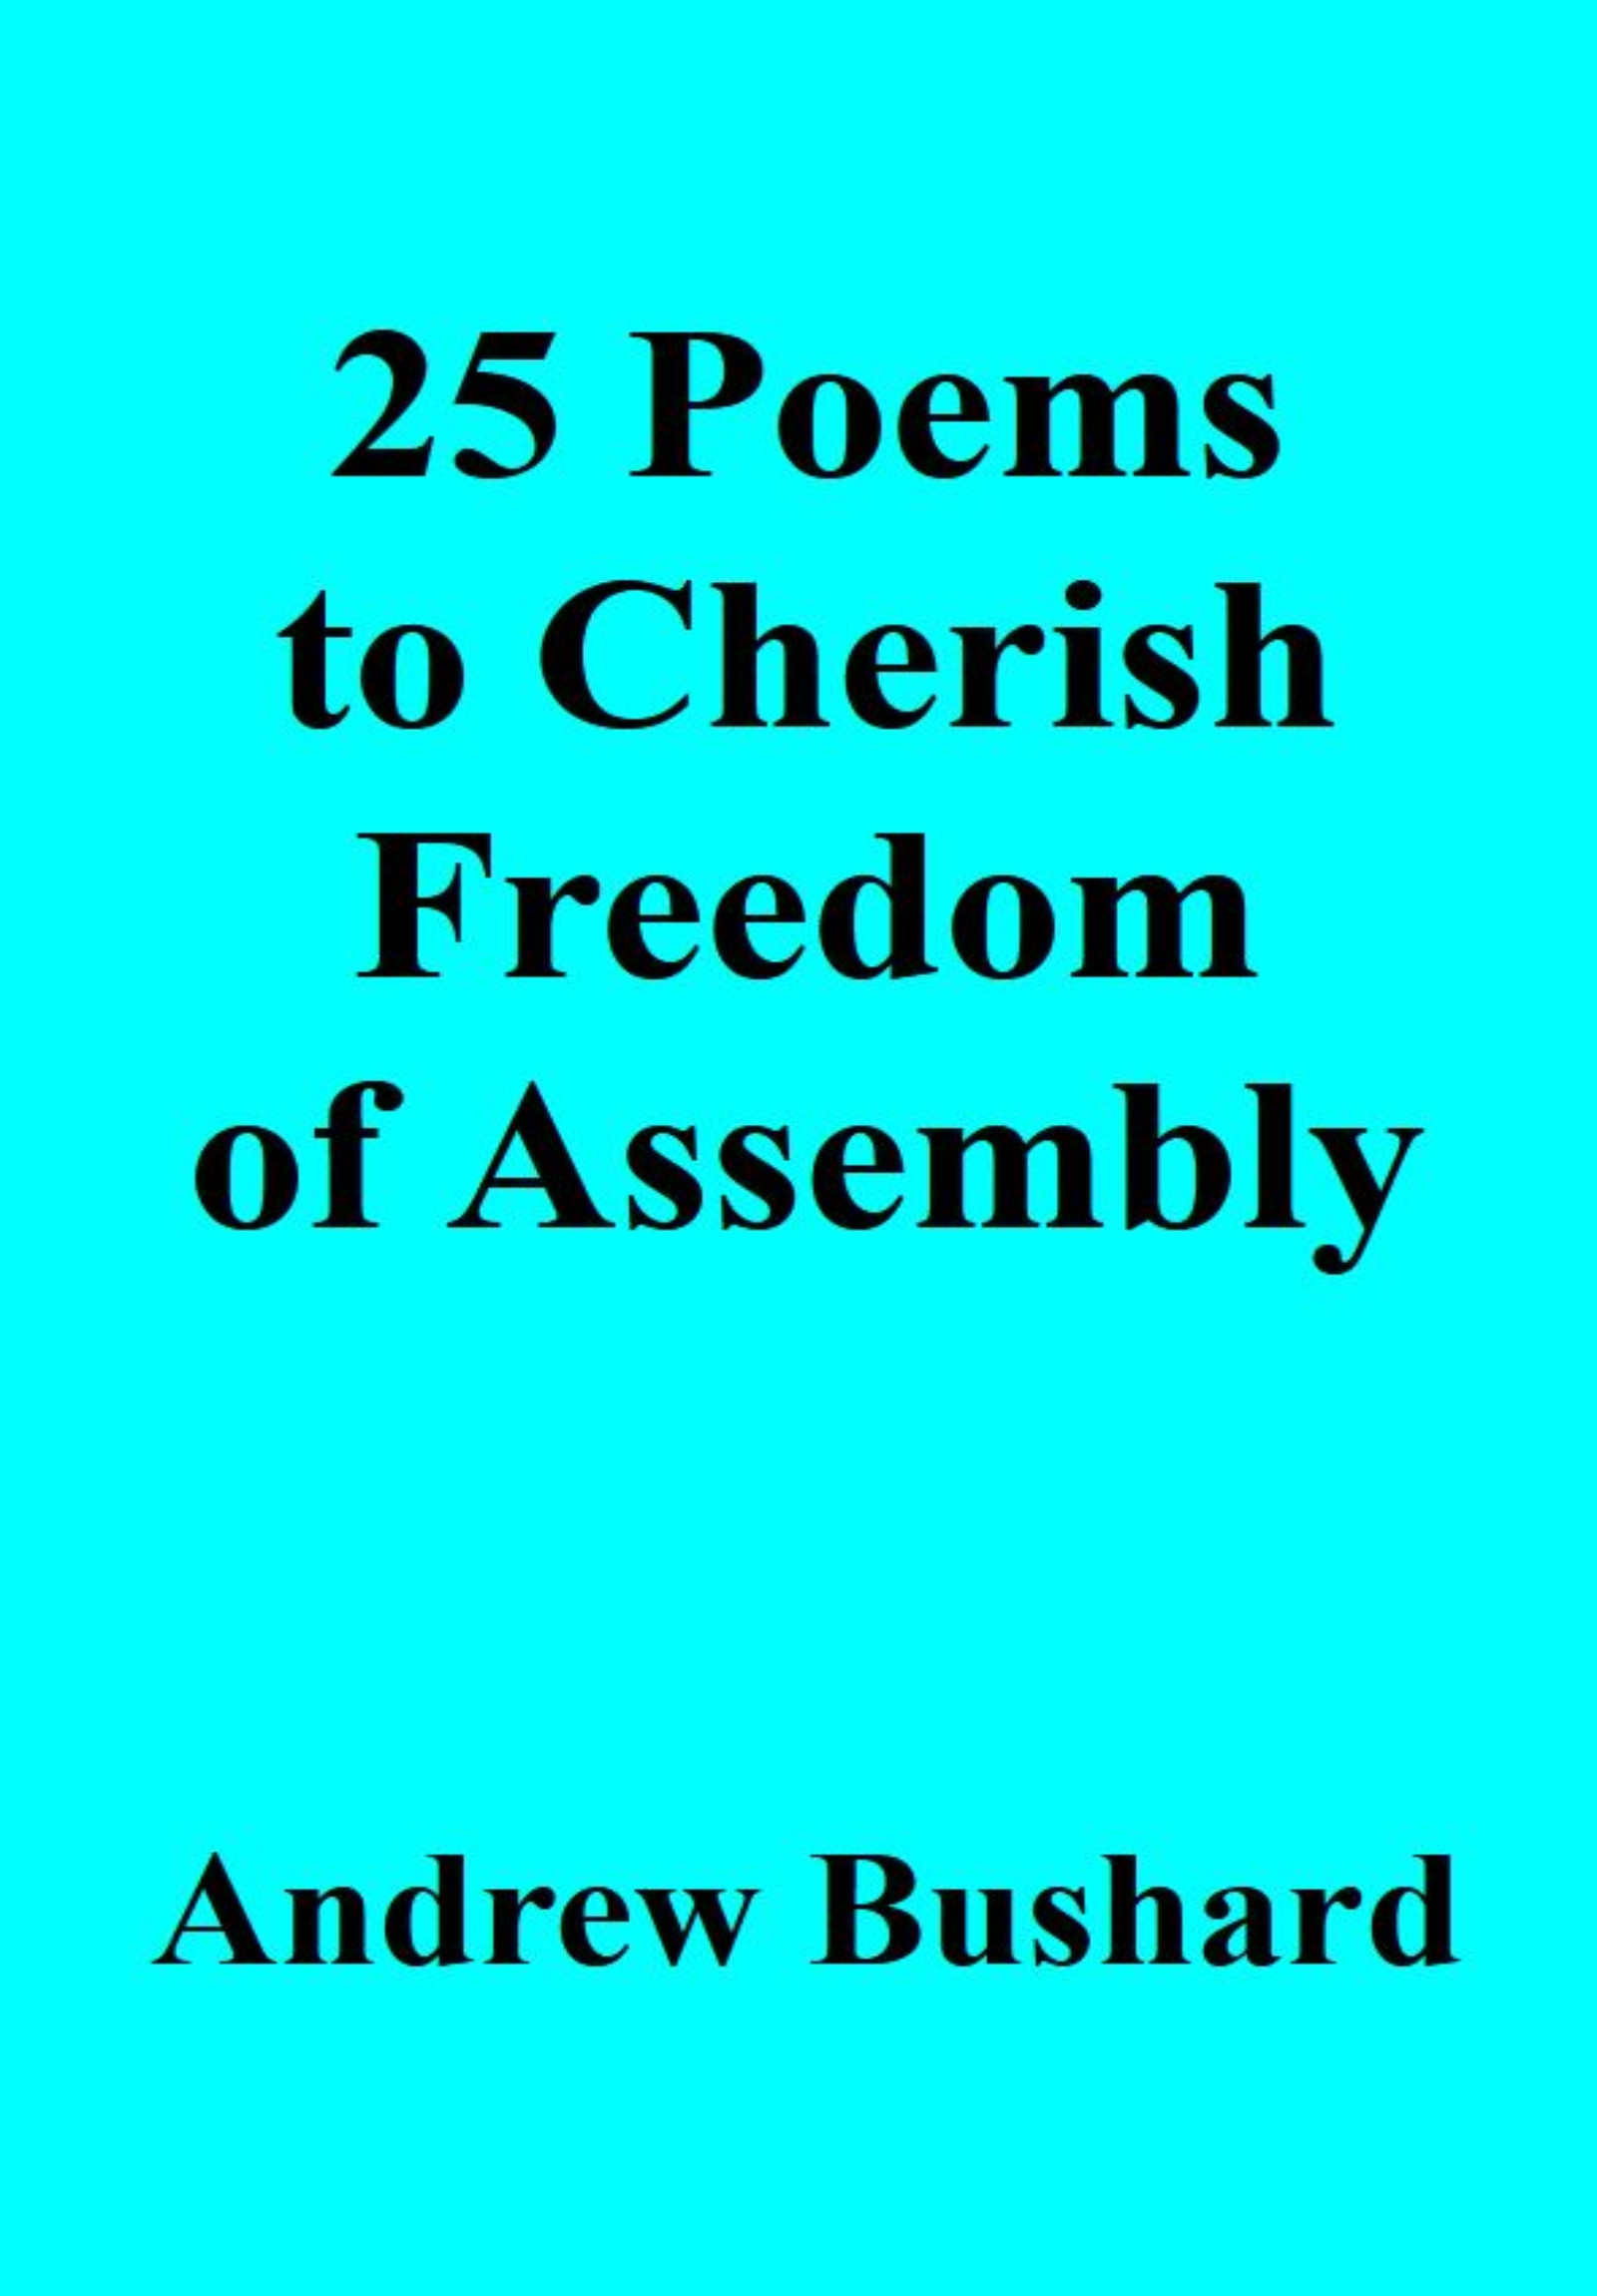 25 Poems to Cherish Freedom of Assembly's featured image